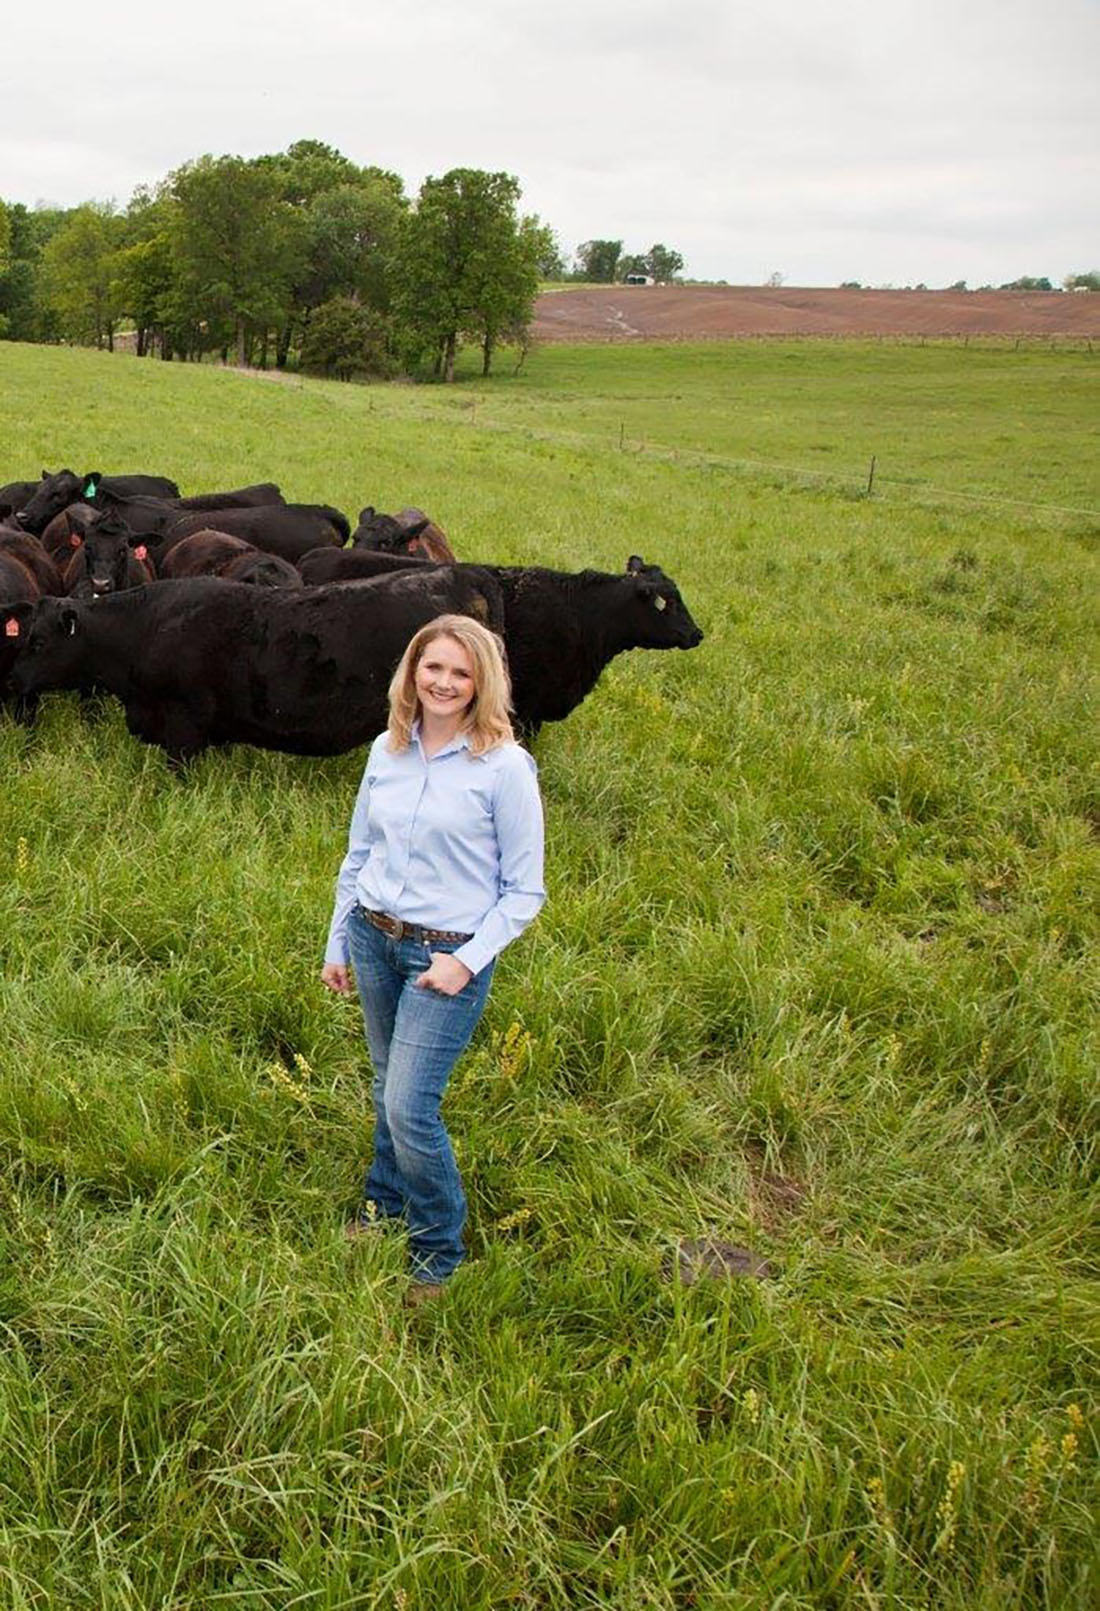 Women move to forefront of Ag production in Midwest